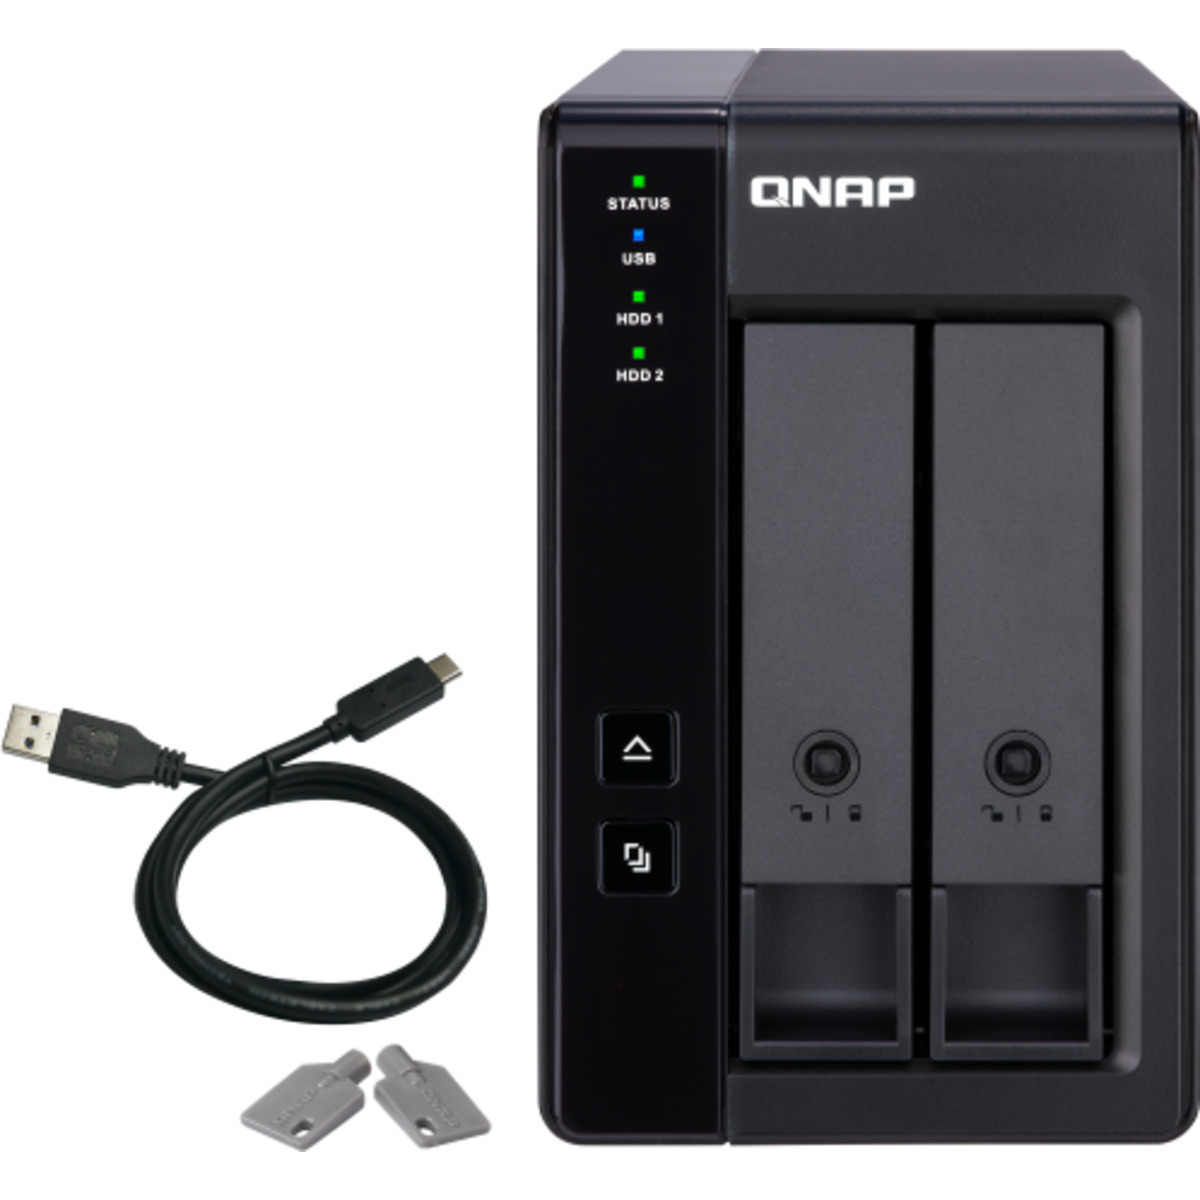 QNAP TR-002 External Expansion Drive 4tb 2-Bay Desktop Multimedia / Power User / Business Expansion Enclosure 2x2tb Western Digital Red Pro WD2002FFSX 3.5 7200rpm SATA 6Gb/s HDD NAS Class Drives Installed - Burn-In Tested TR-002 External Expansion Drive